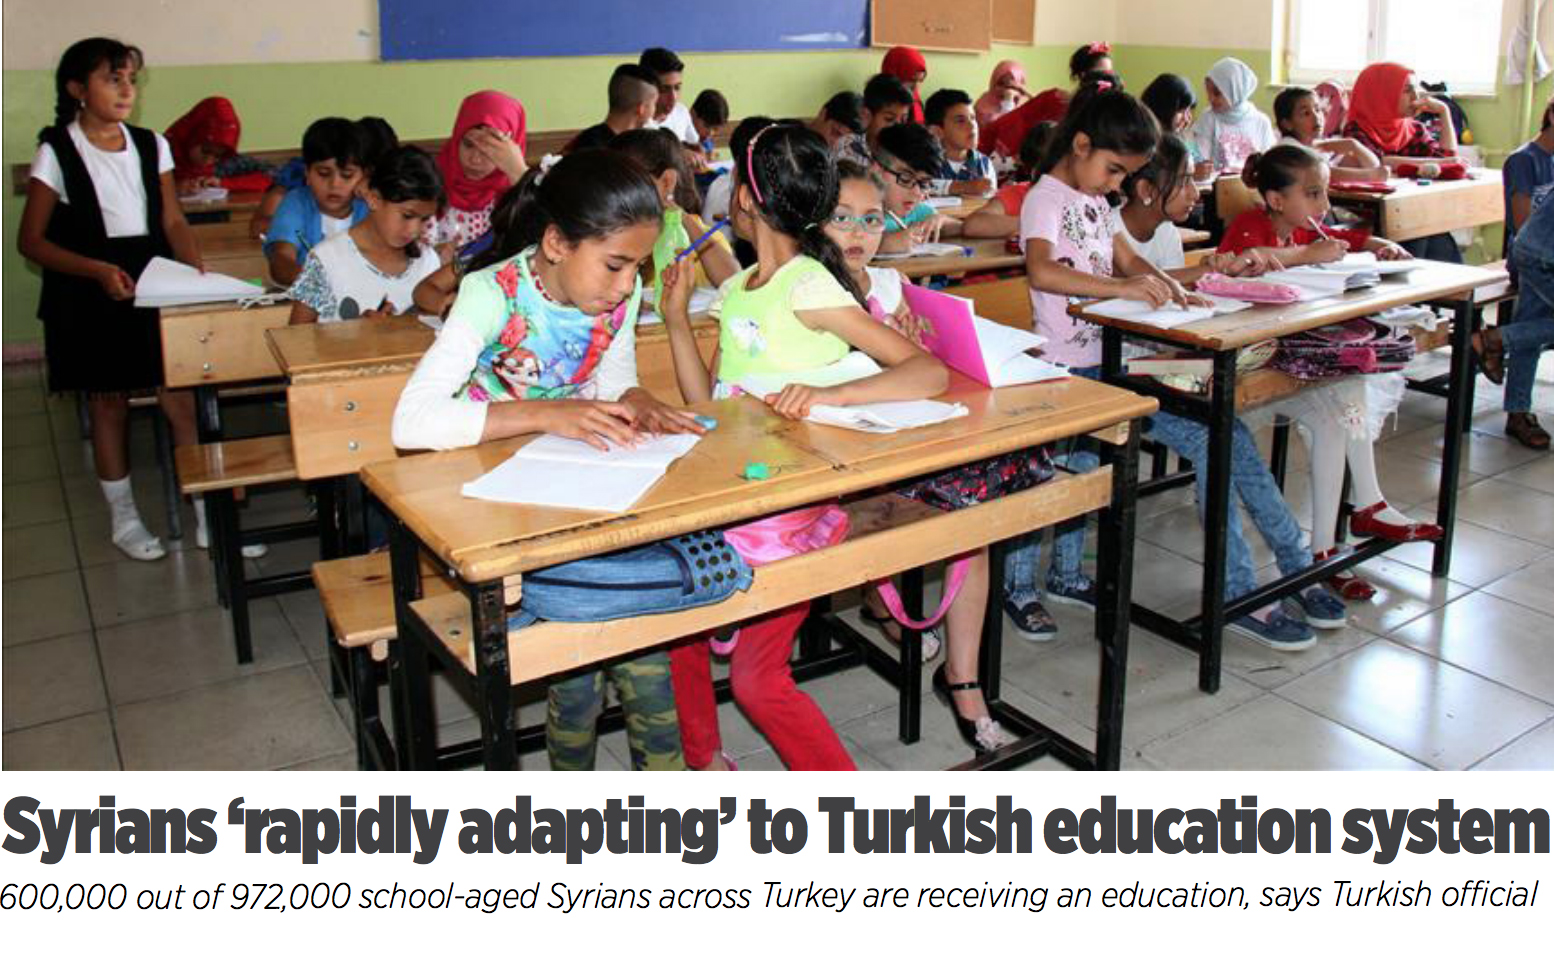 Syrians ‘rapidly adapting’ to Turkish education system